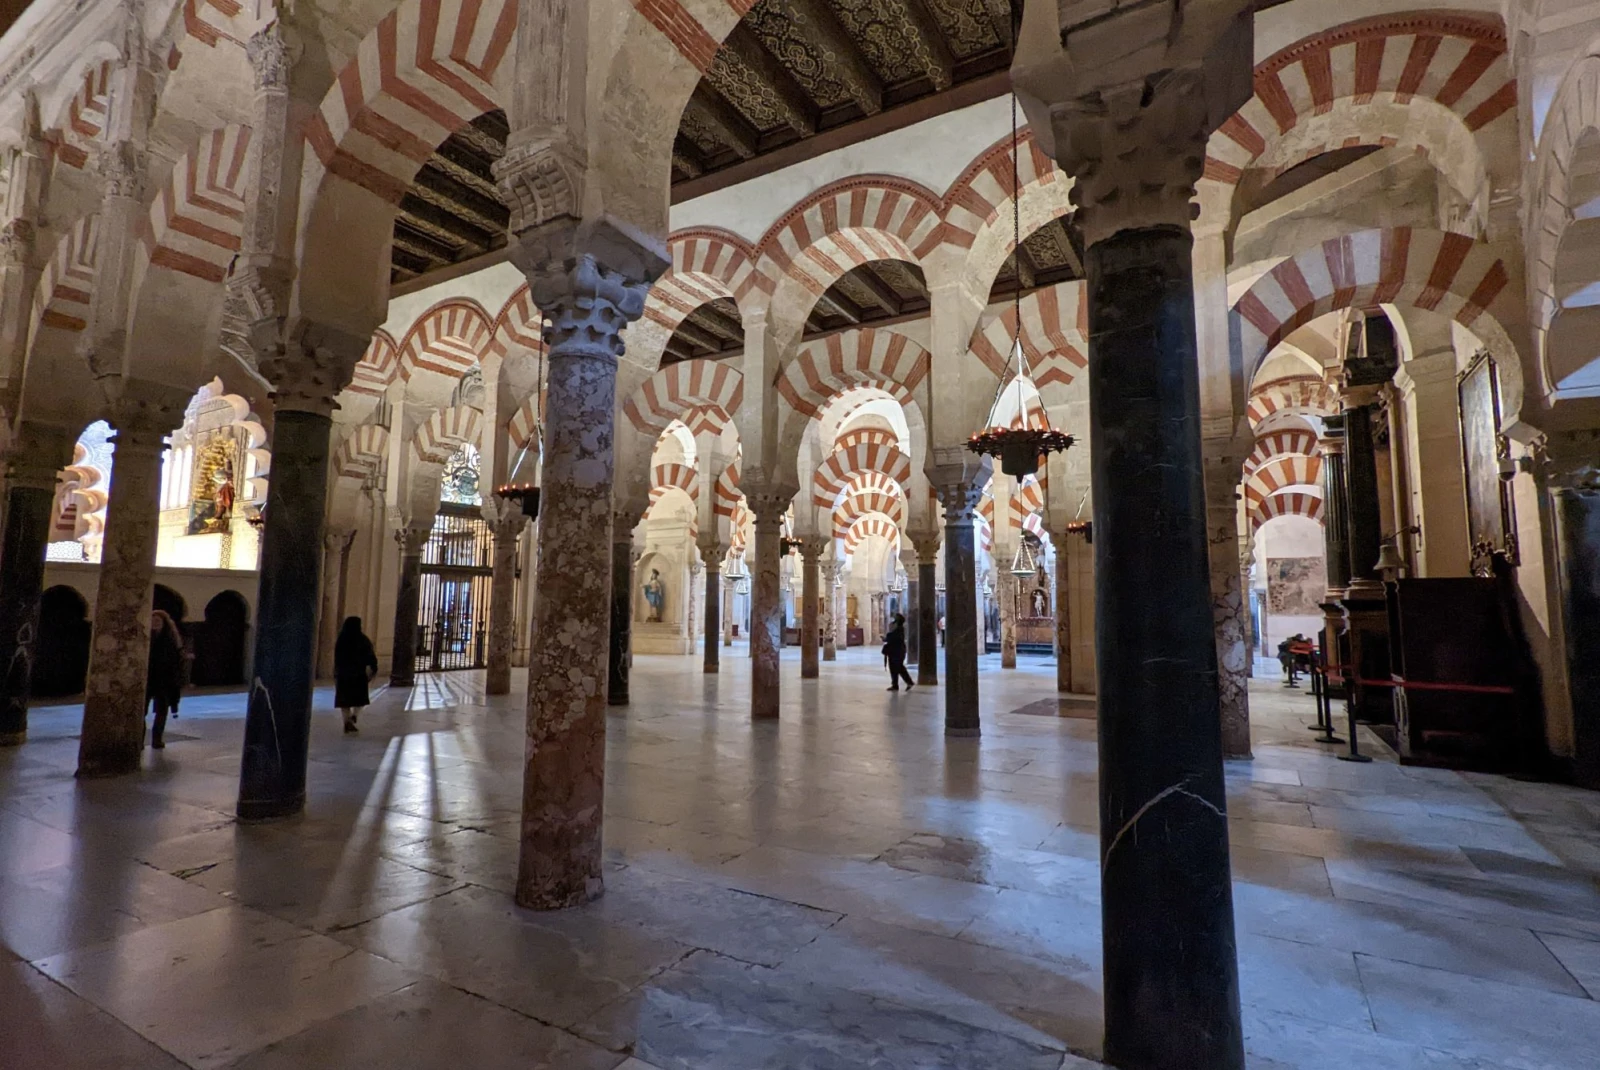 inside an old cathedral with white and red tile